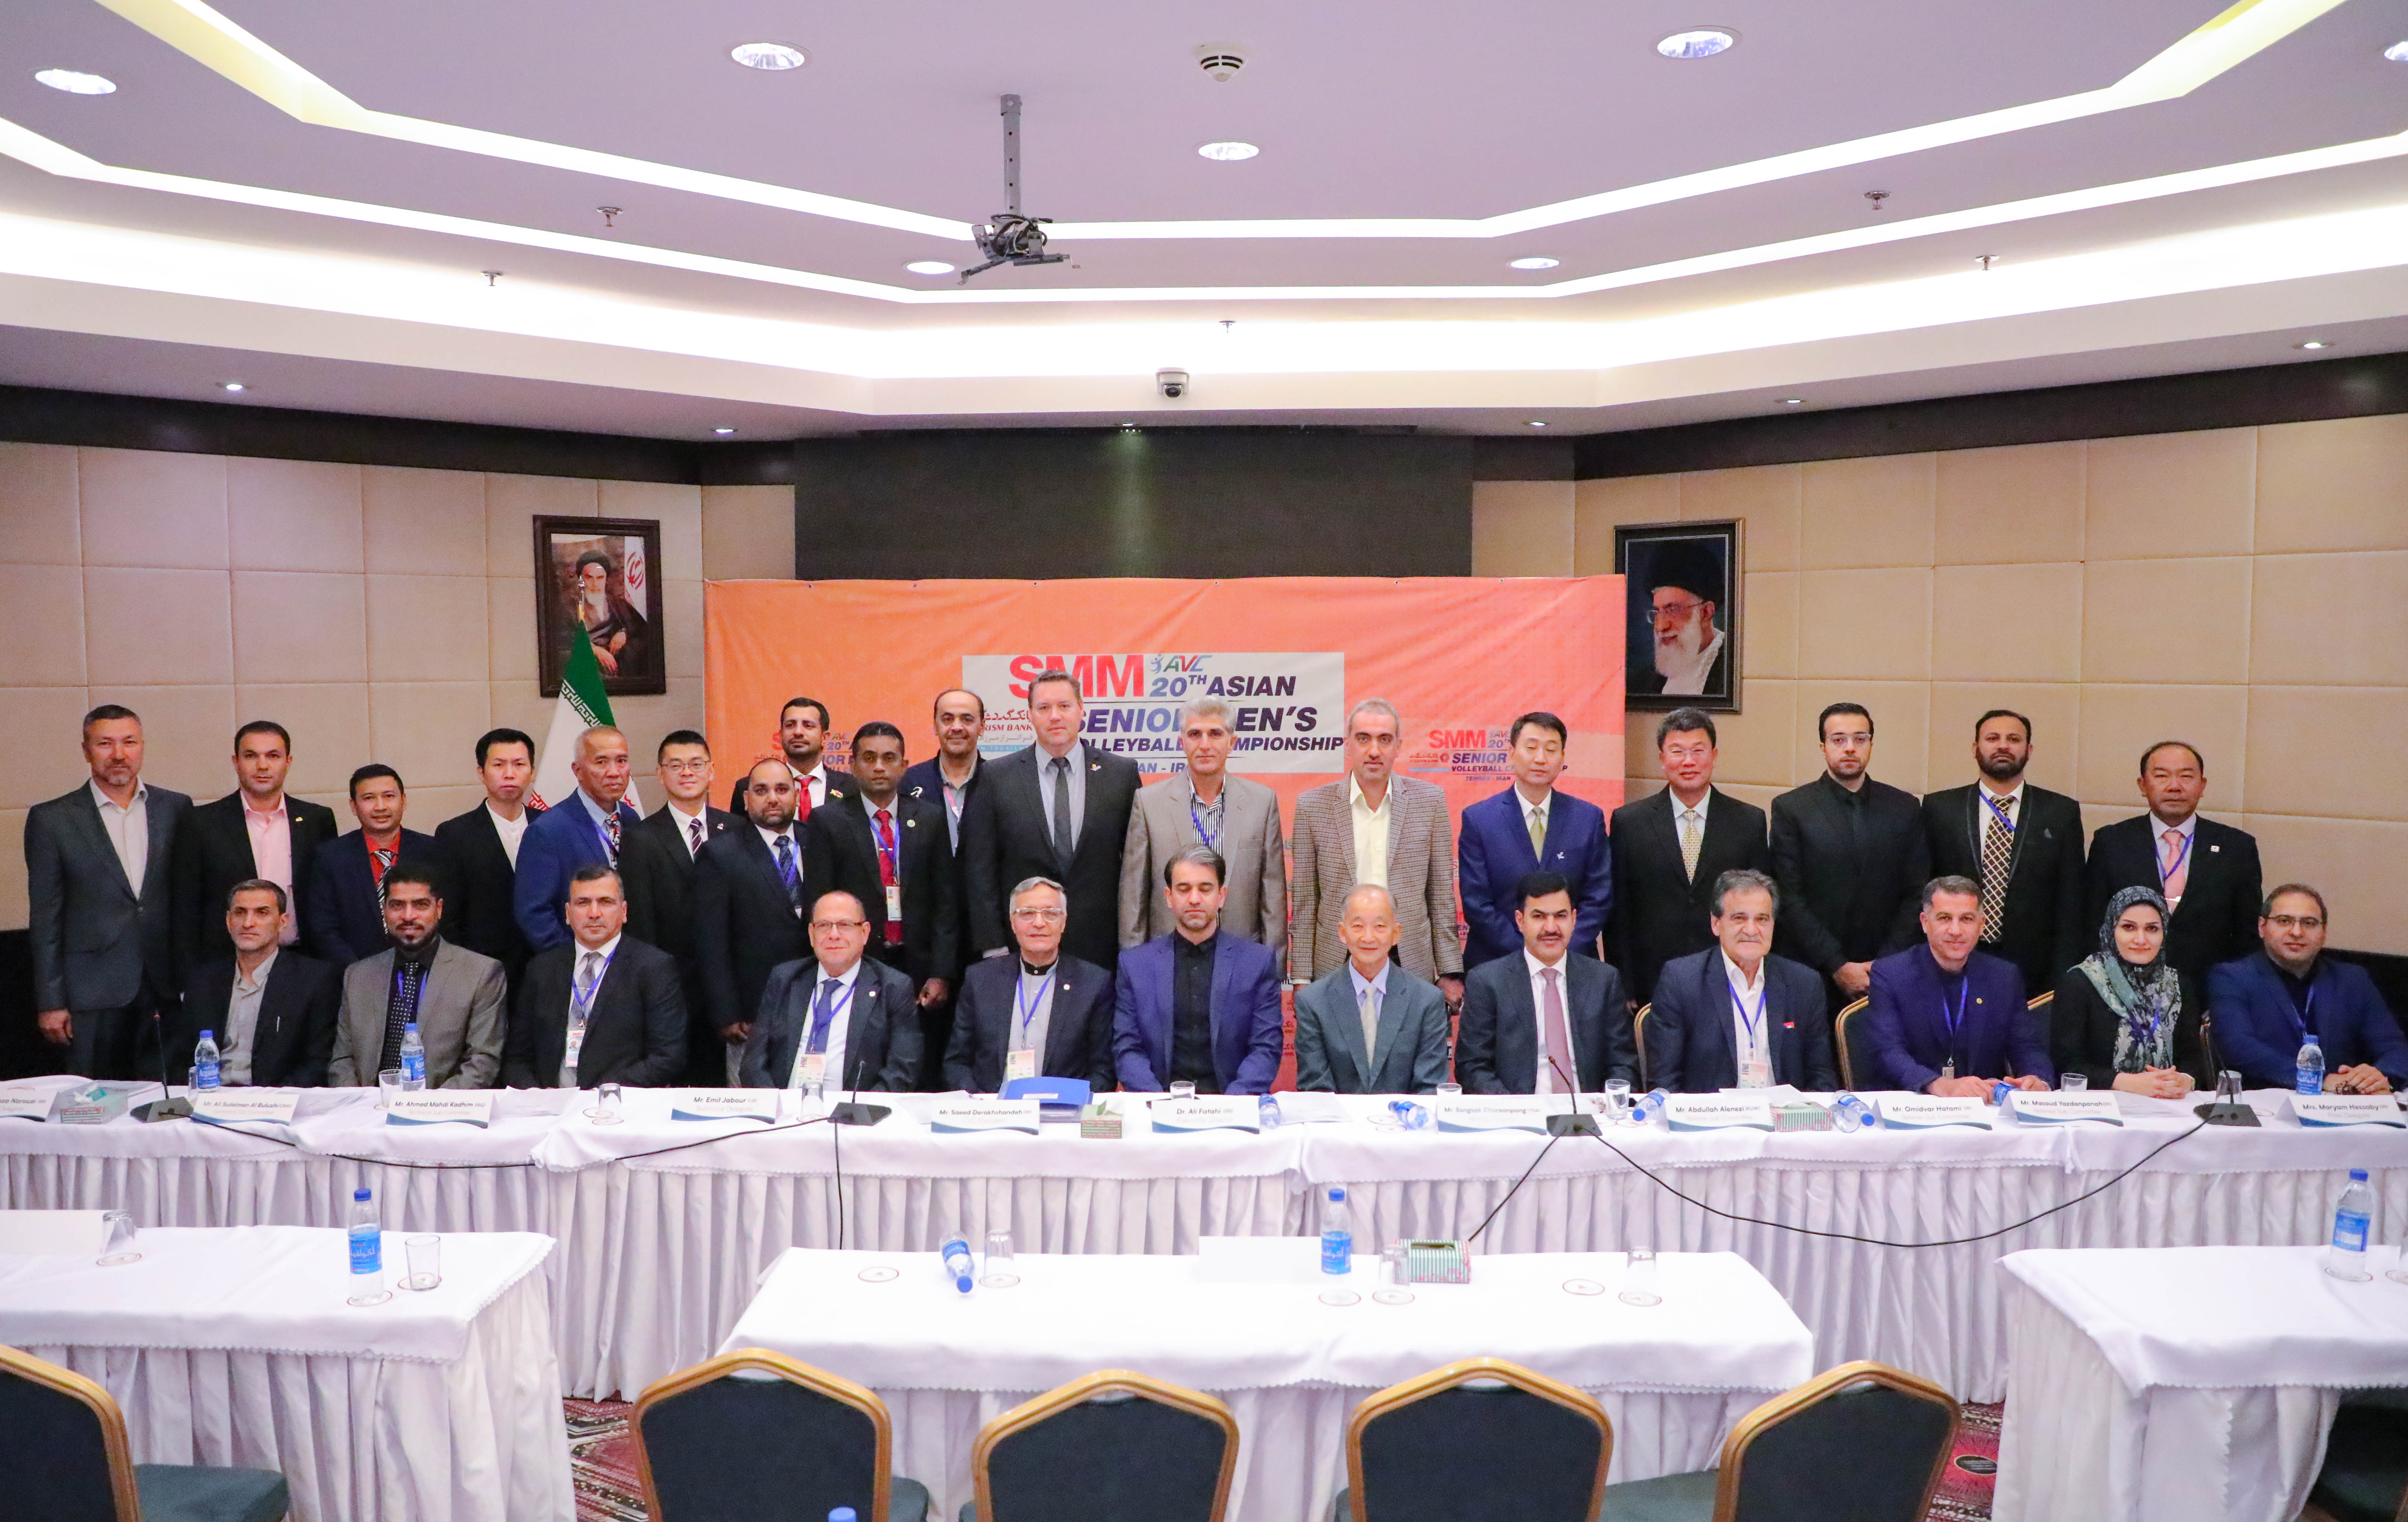 GENERAL TECHNICAL MEETING OF 20th ASIAN SENIOR MEN’S CHAMPIONSHIP COMPLETED AHEAD OF MATCHDAYS